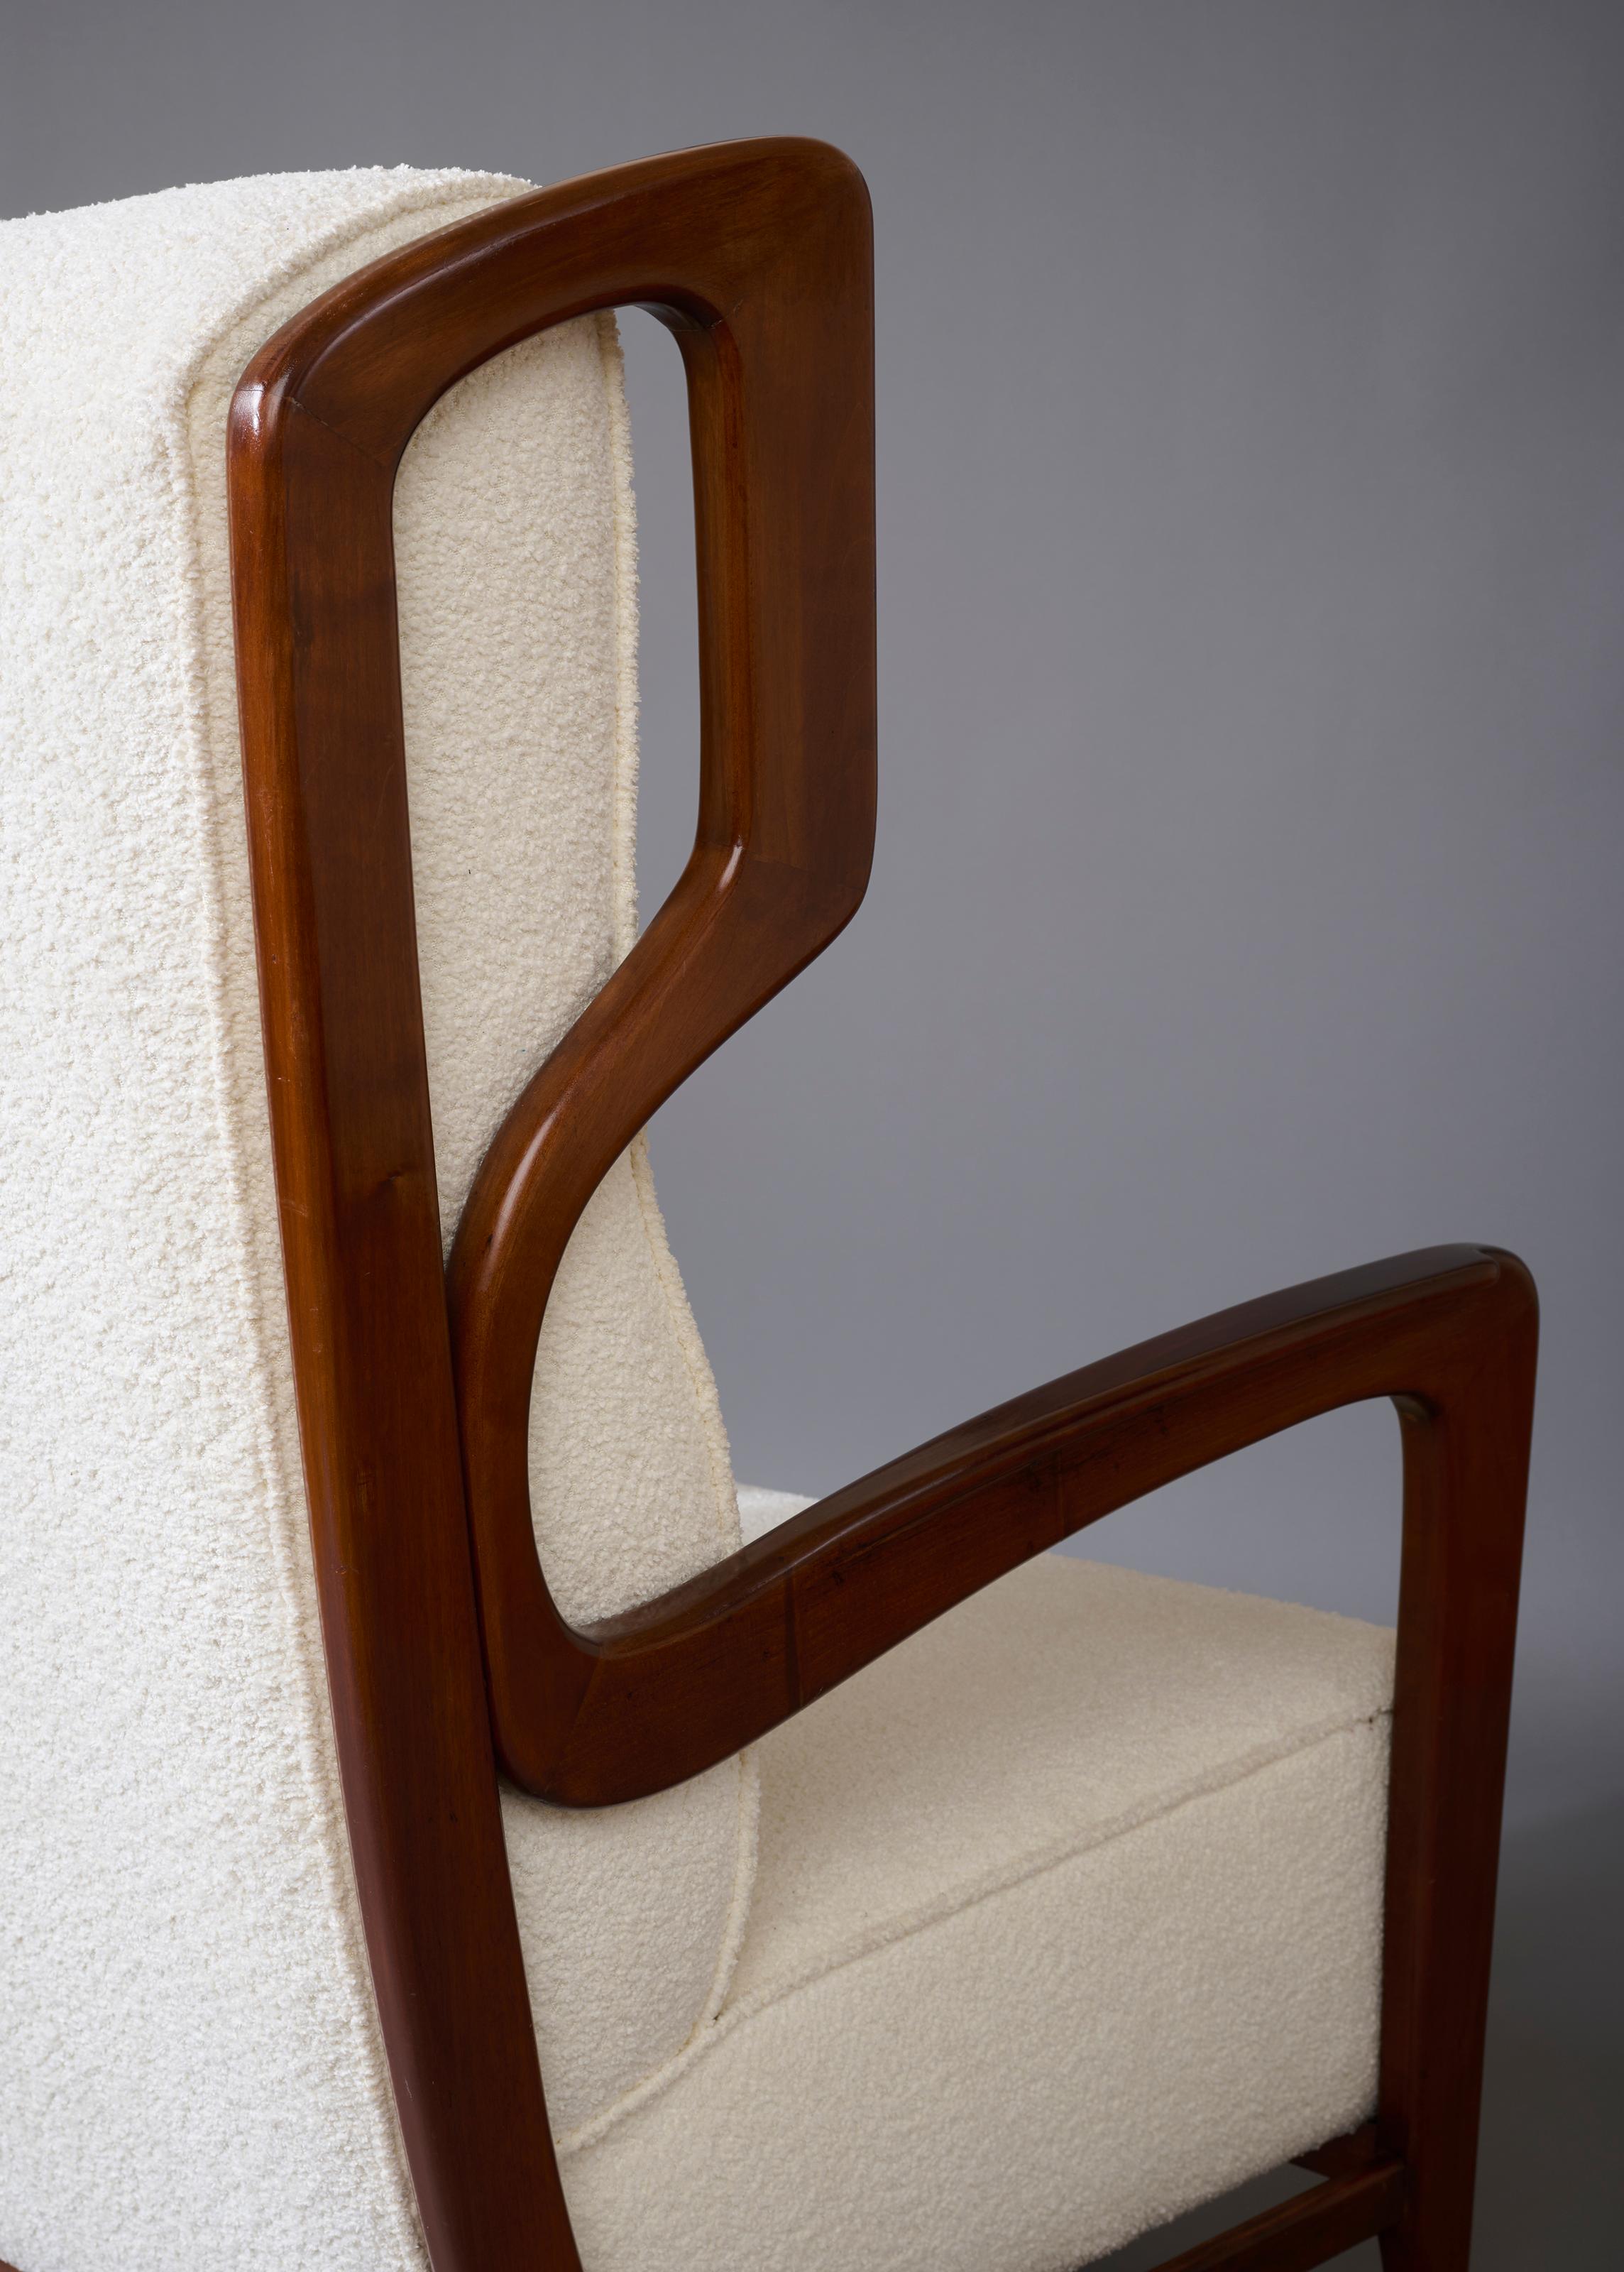 Gio Ponti, Exceptional Pair of Rare Wingback Armchairs in Walnut, Italy, 1940s For Sale 11